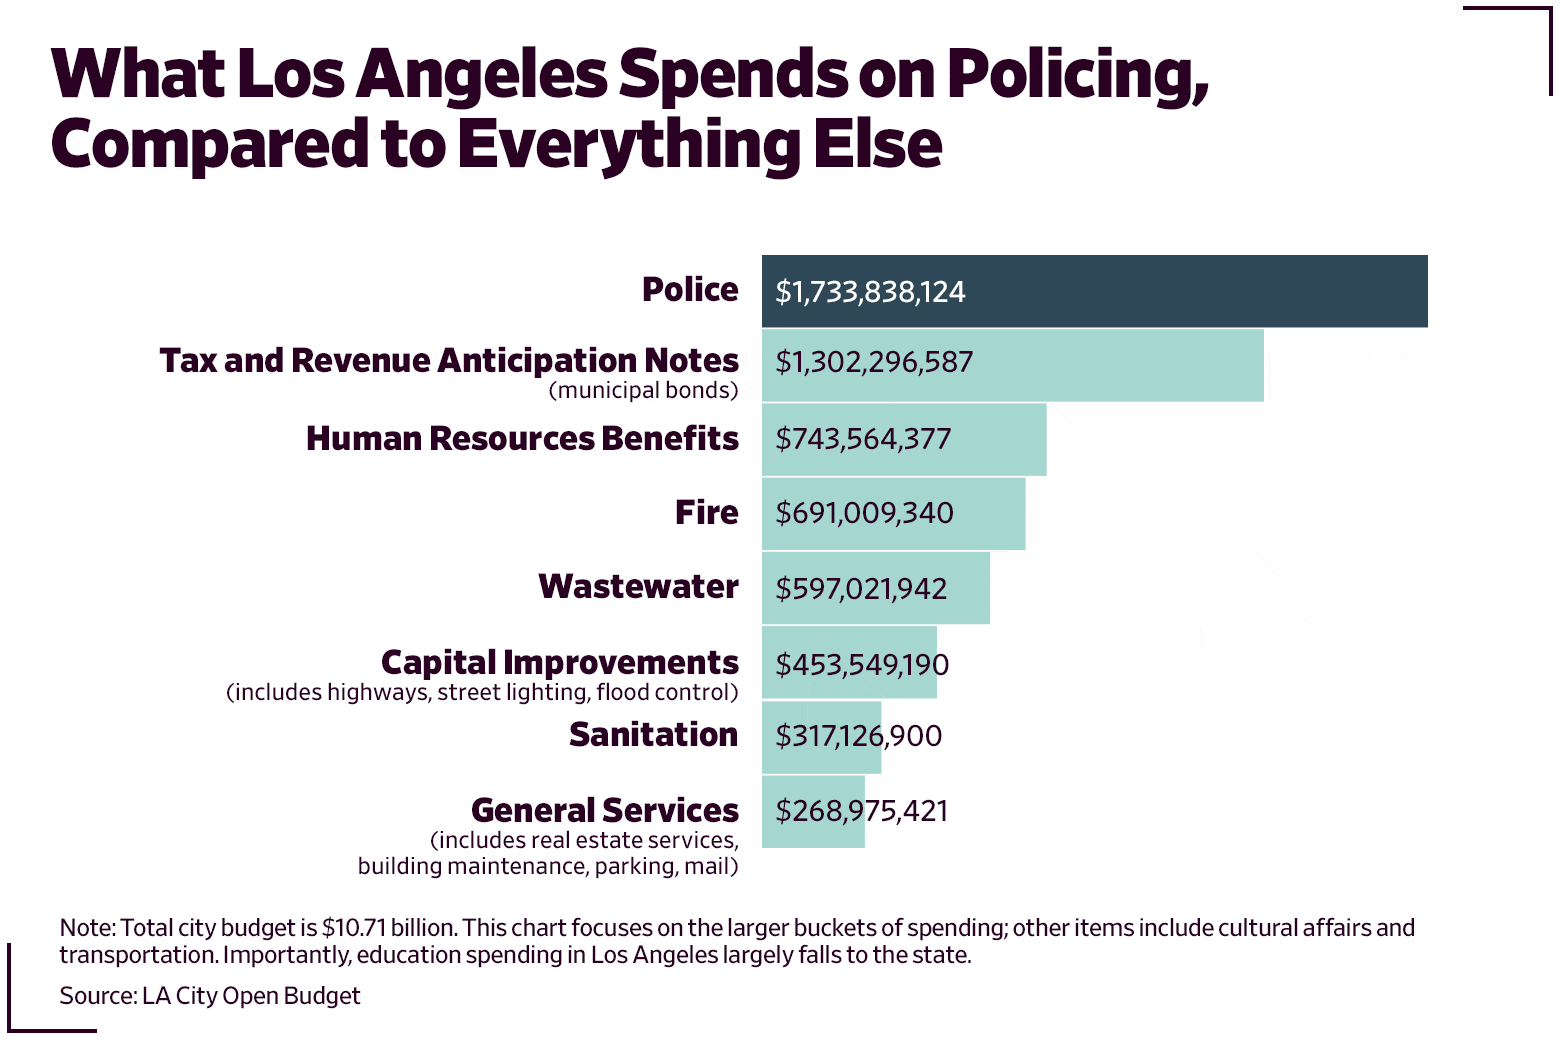 Bar graph showing what Los Angeles spends on policing compared with everything else